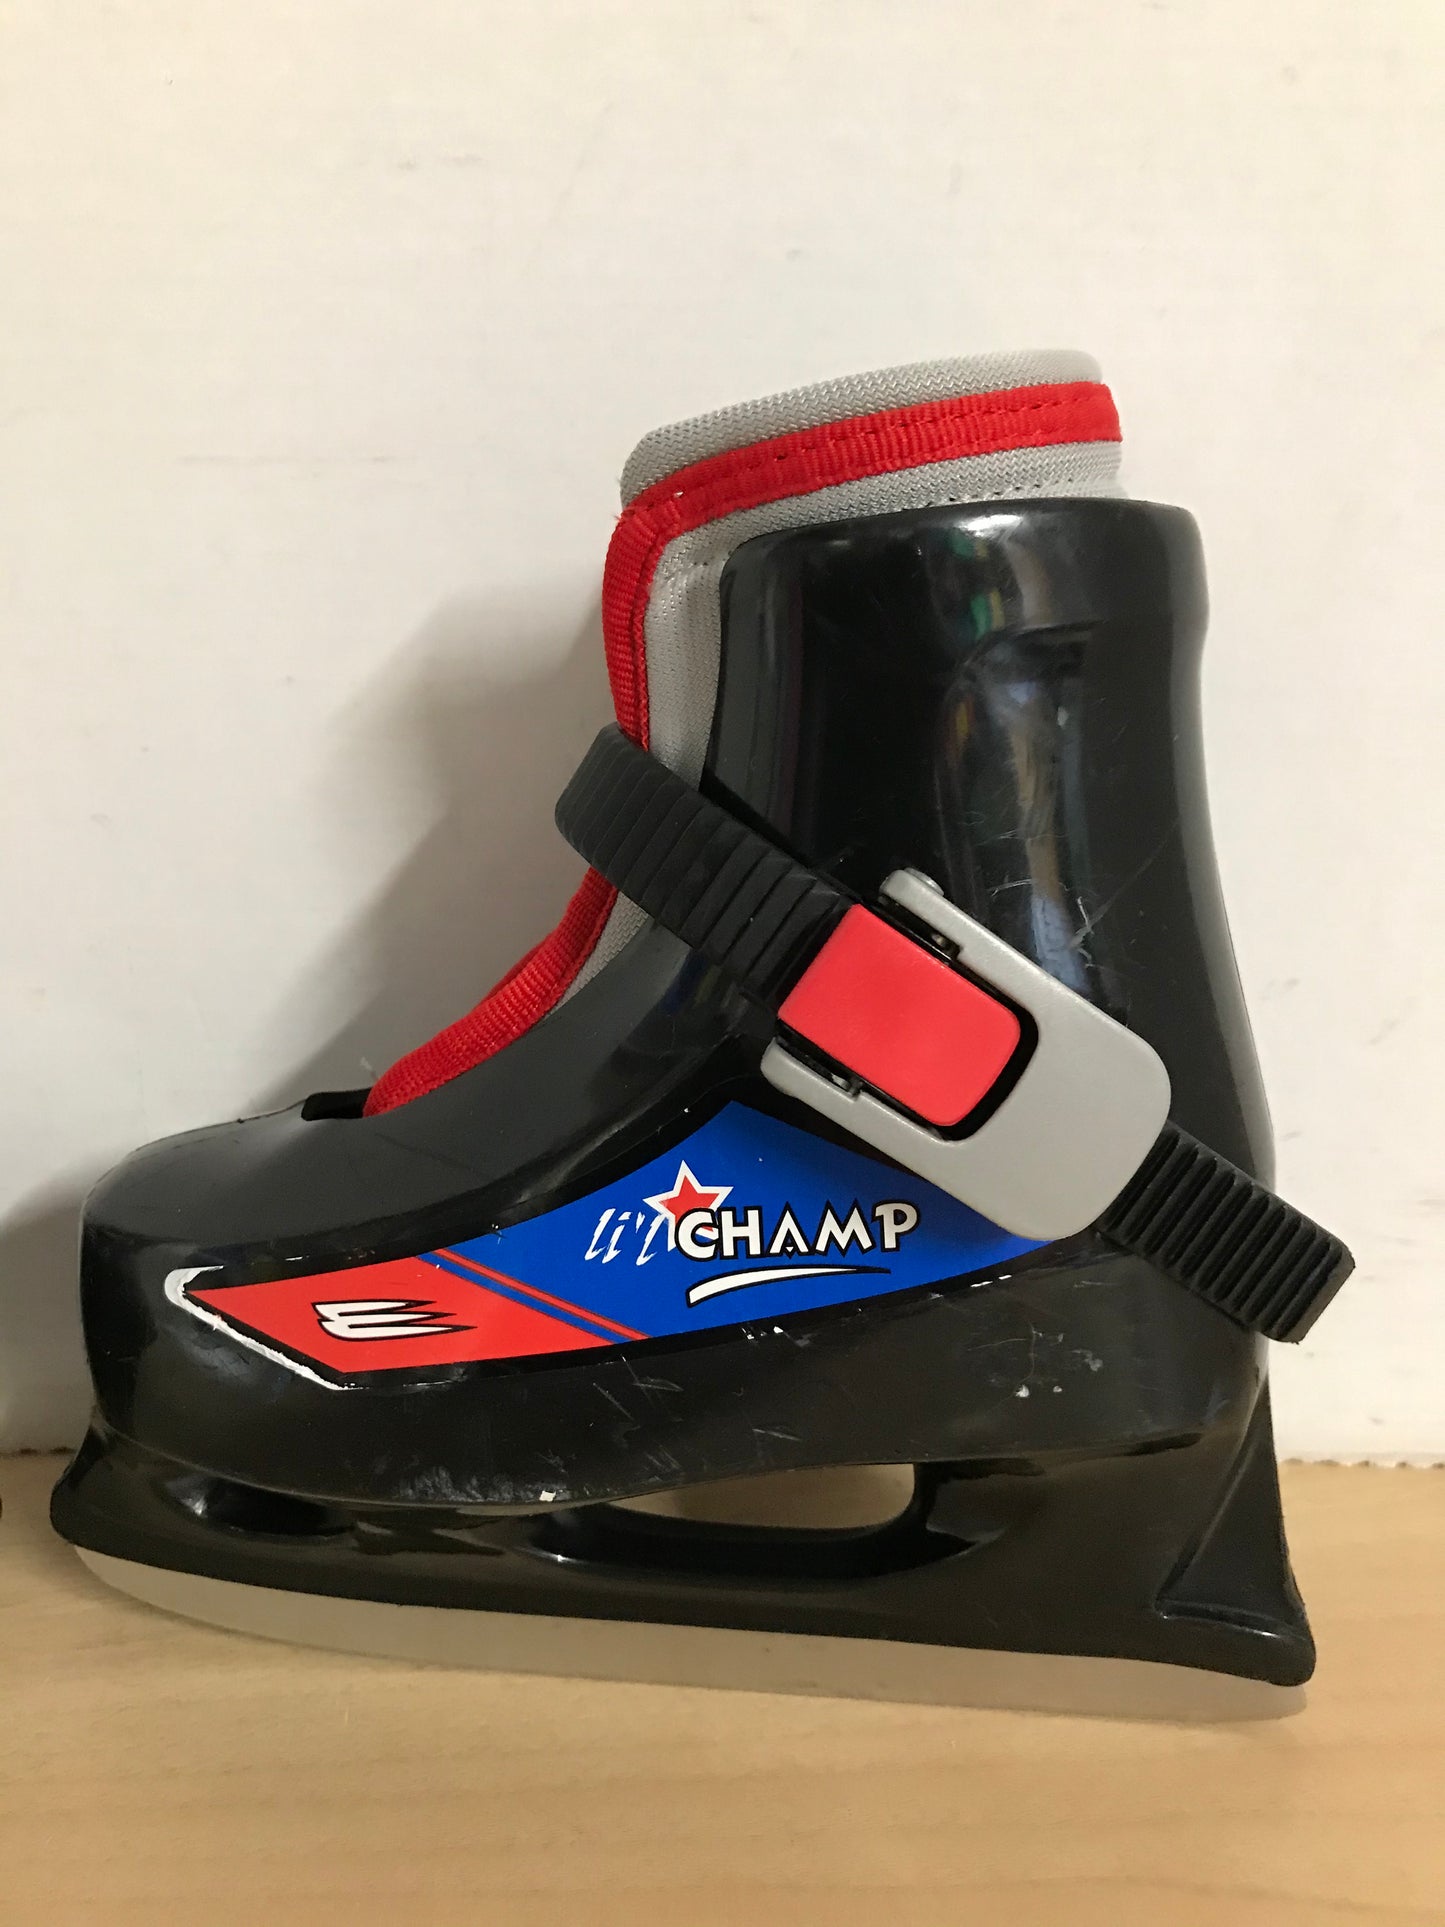 Ice Skates Child Size 6-7 Toddler Bauer Lil Champ Adjustable Molded Plastic With Liner Black Red As New RARE For This Small